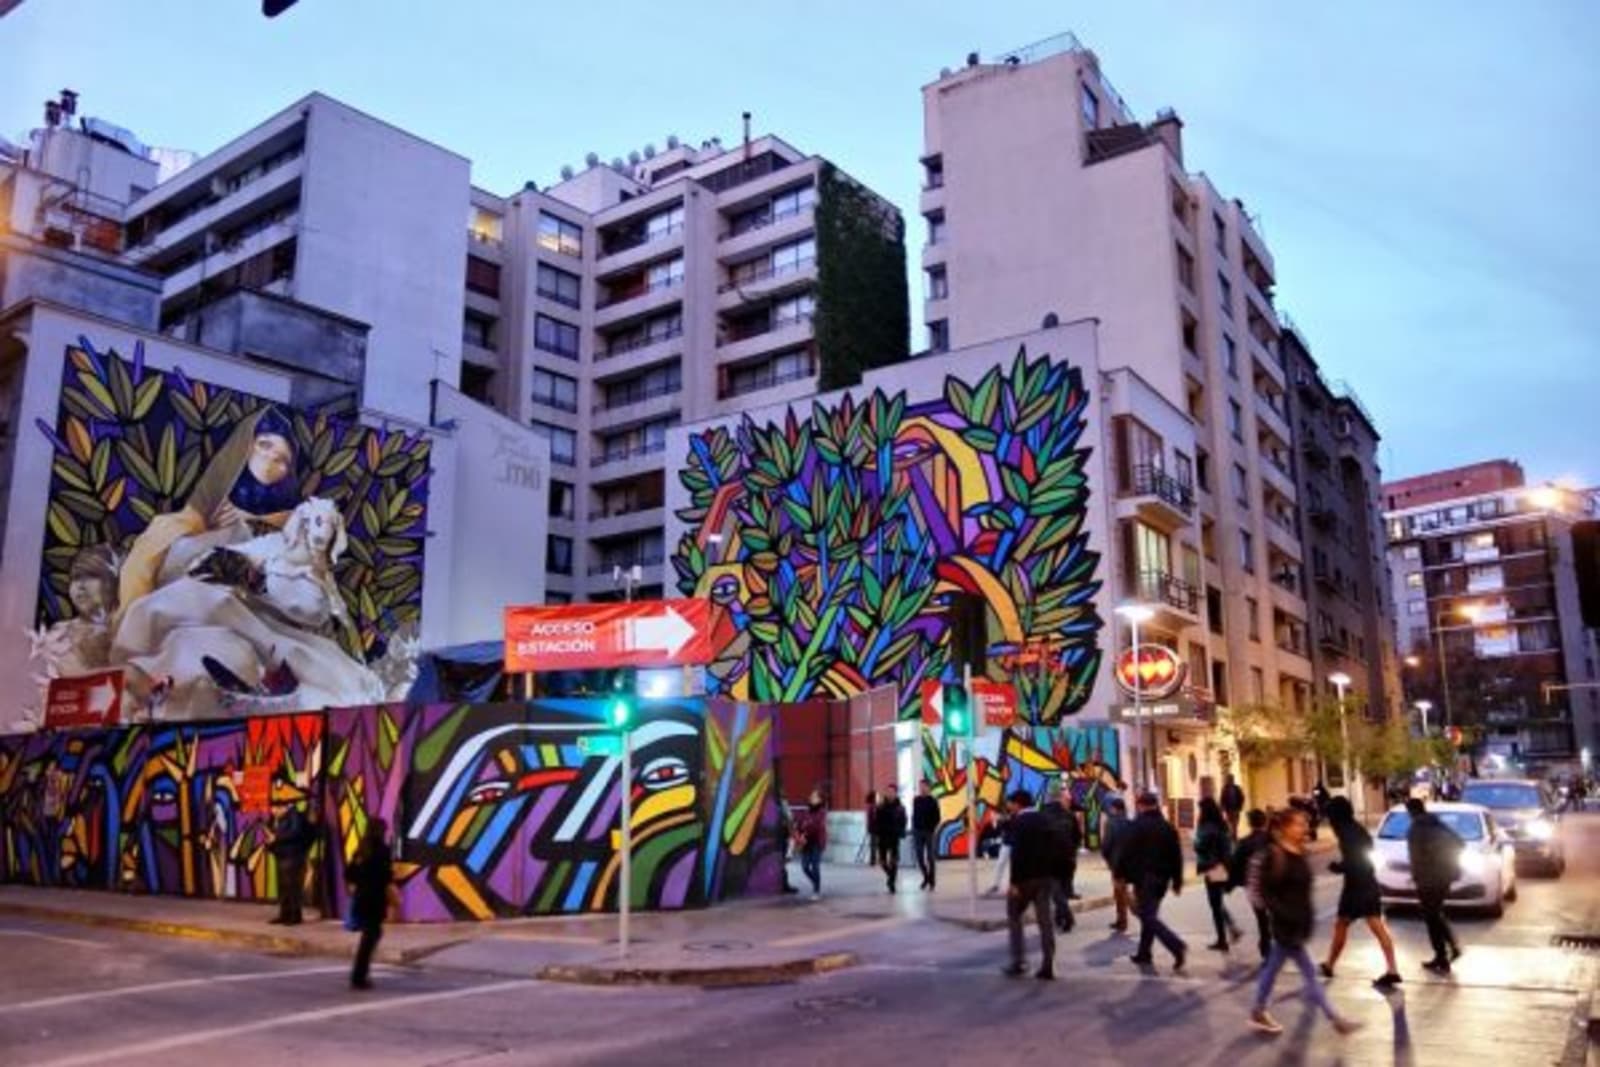 Colourful street art on side of buildings with people walking past